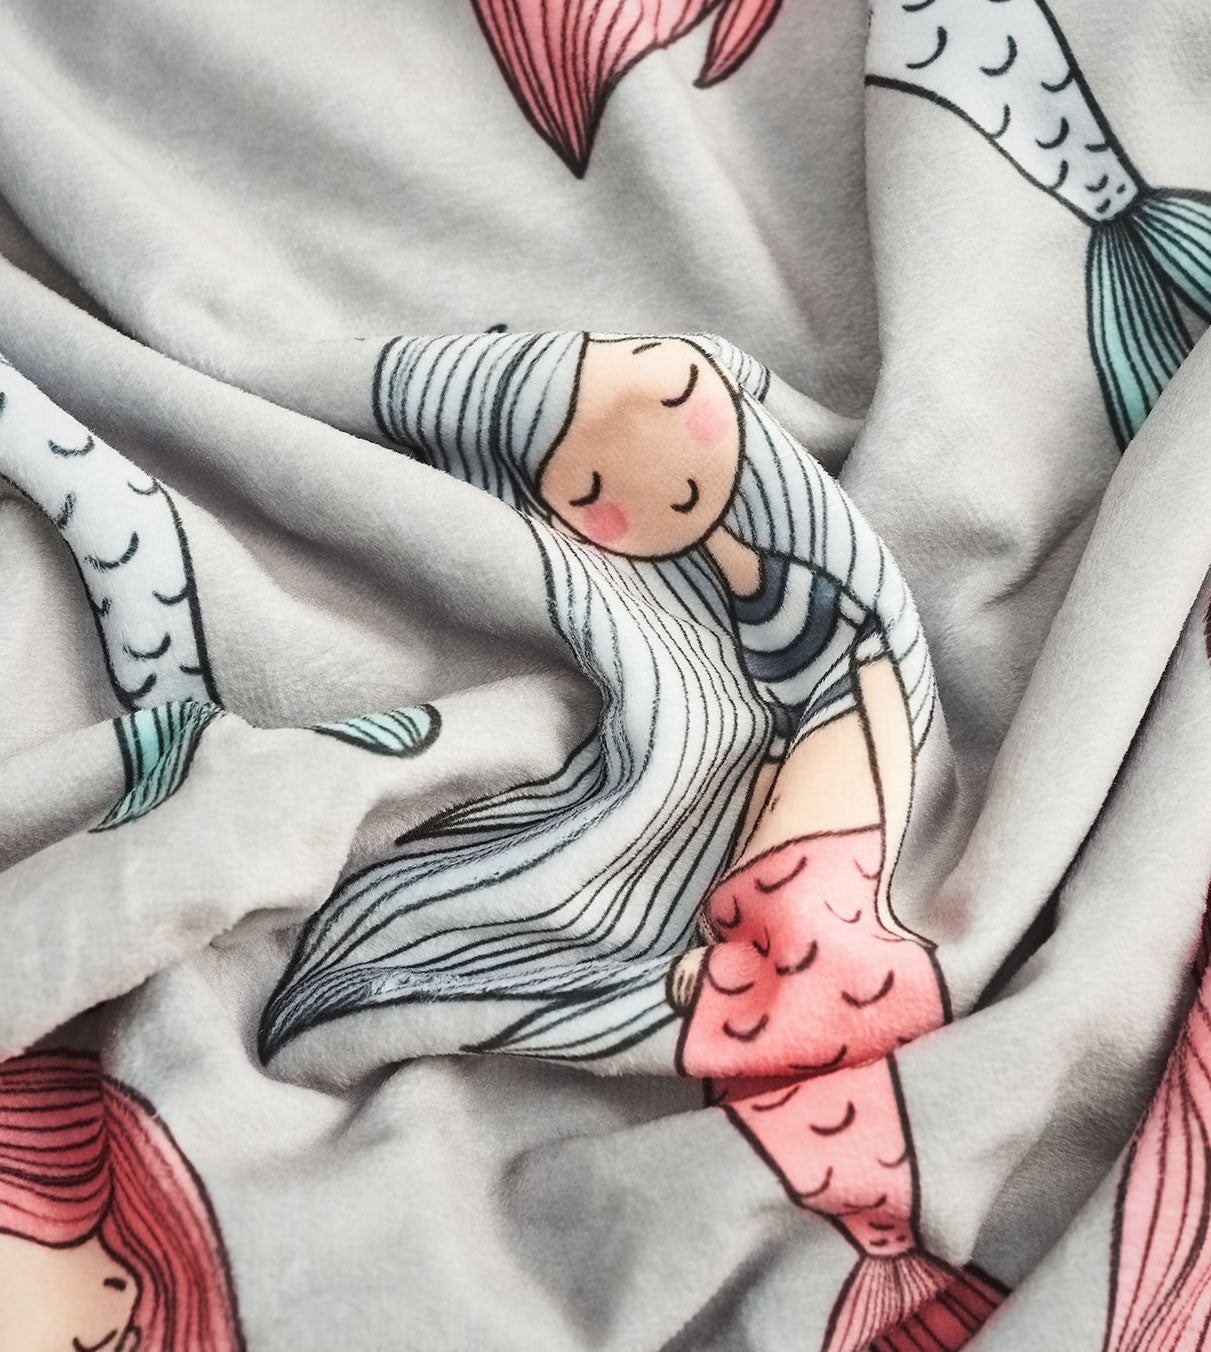 Product: Soft Weighted Blanket Duvet Cover | Color: Mermaid Print